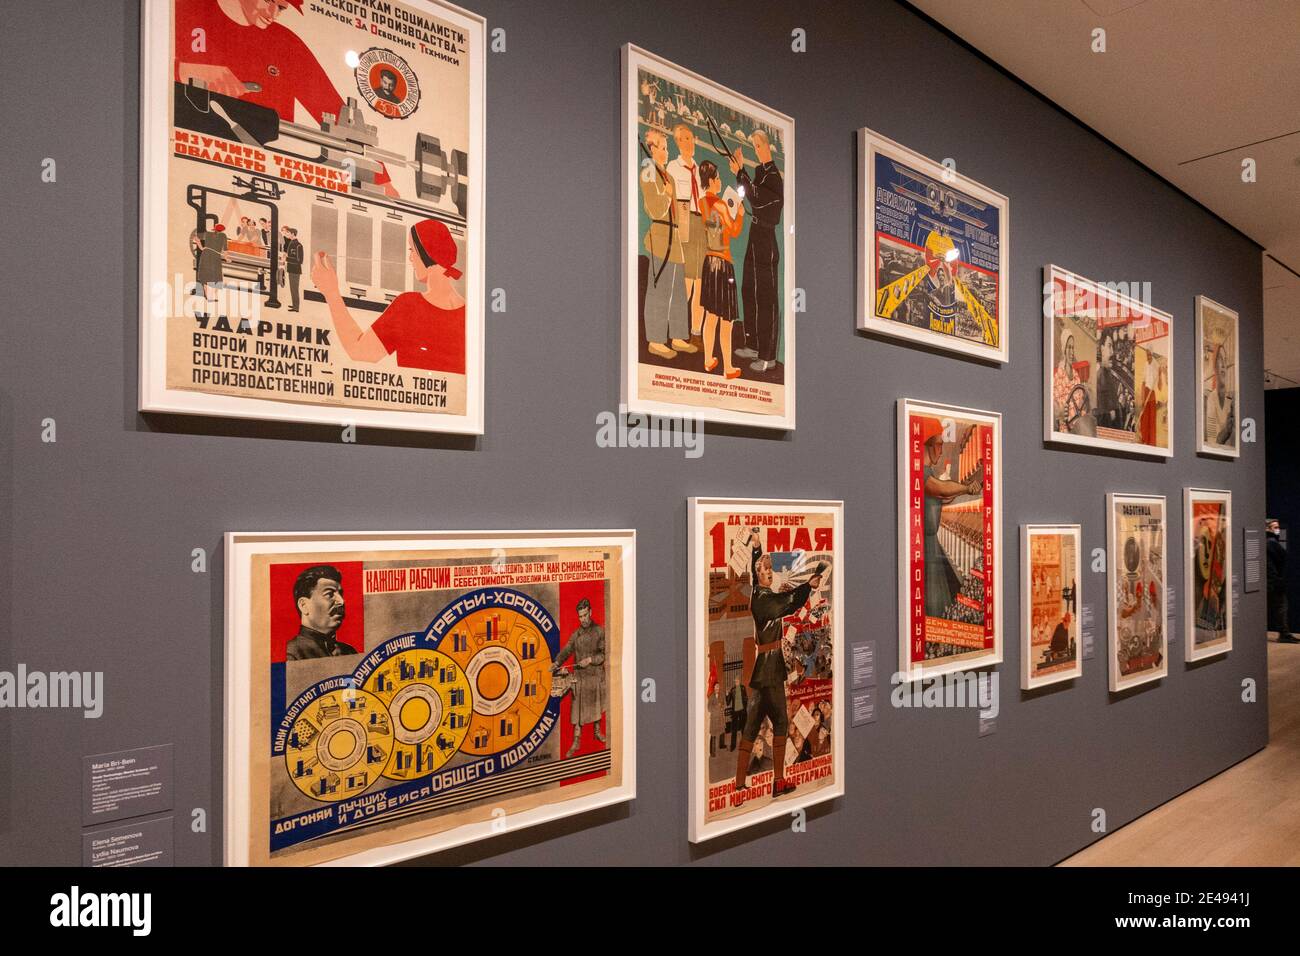 'Engineer, agitator, constructor (the artist reinvented) exhibition of Russian artists at the Museum of Modern Art, New York City, USA Stock Photo